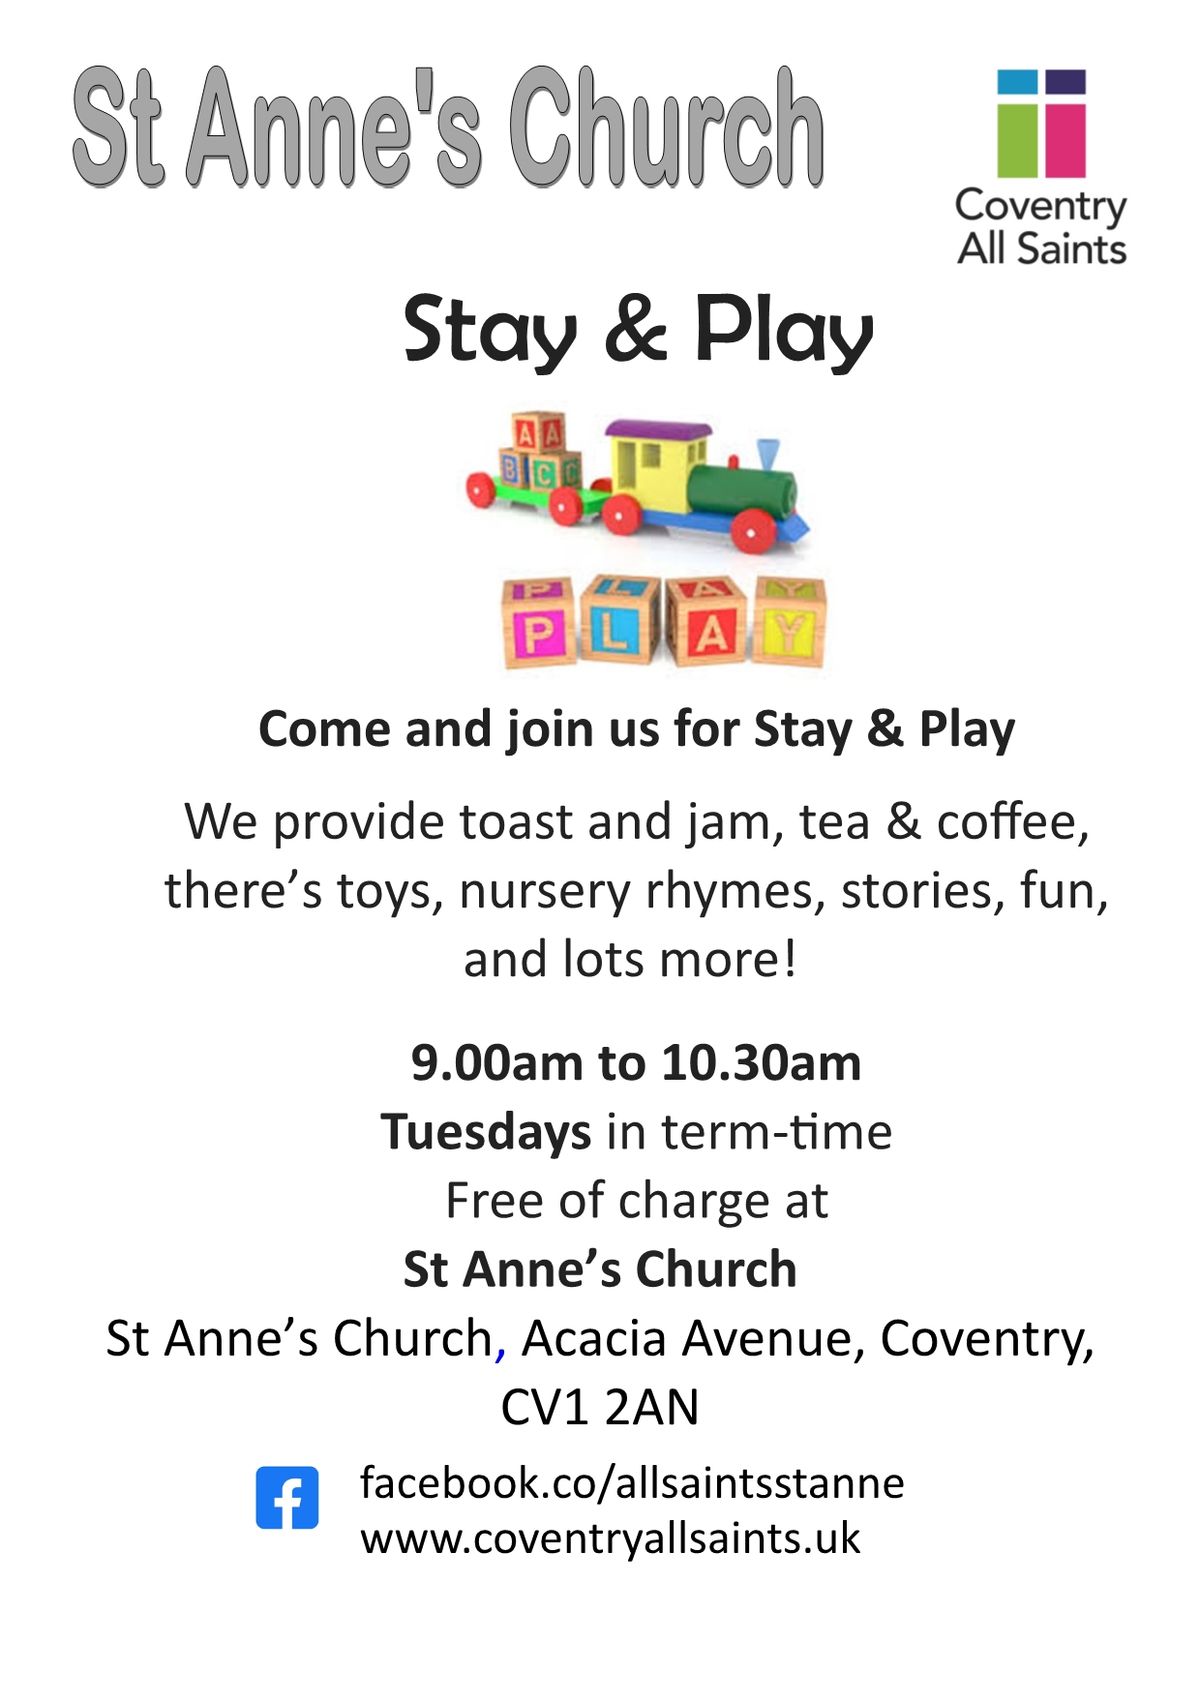 Stay & Play at St Anne's for parents and babies, toddlers, pre-schoolers